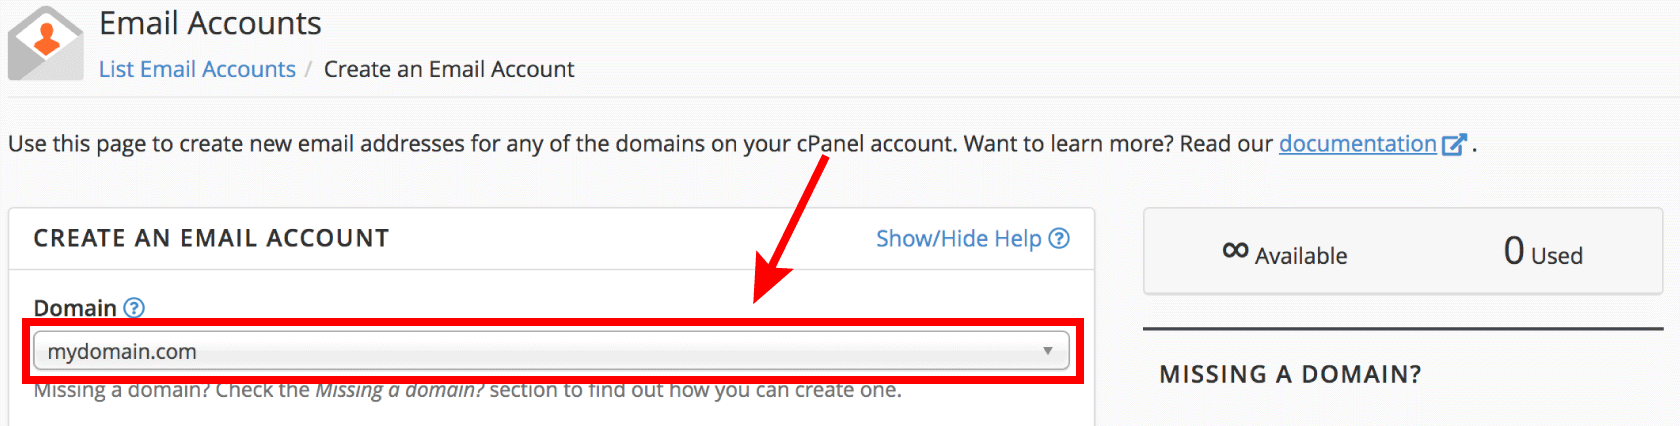 Select domain used for creating an email account in cPanel